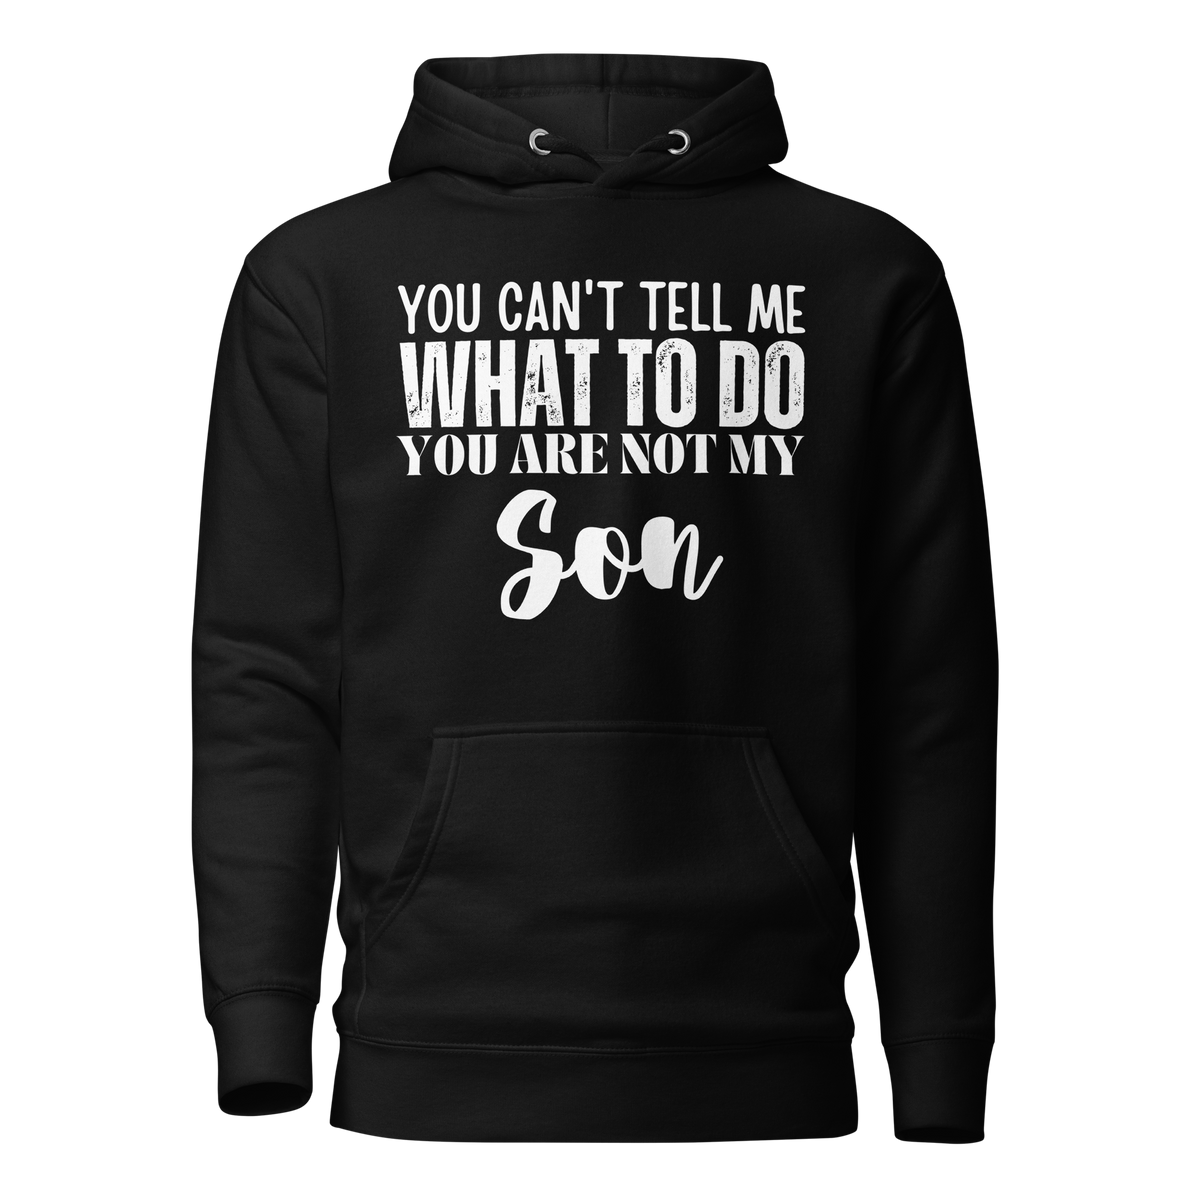 You can't tell me what to do you are not my son, hoodie, gift for mom, gift for dad, funny parents apparel, funny dad shirt, funny mom shirt, dad hoodie, mom hoodie, parenthood apparel, funny tshirt, sarcastic tee, fathers day gift, mothers day gift